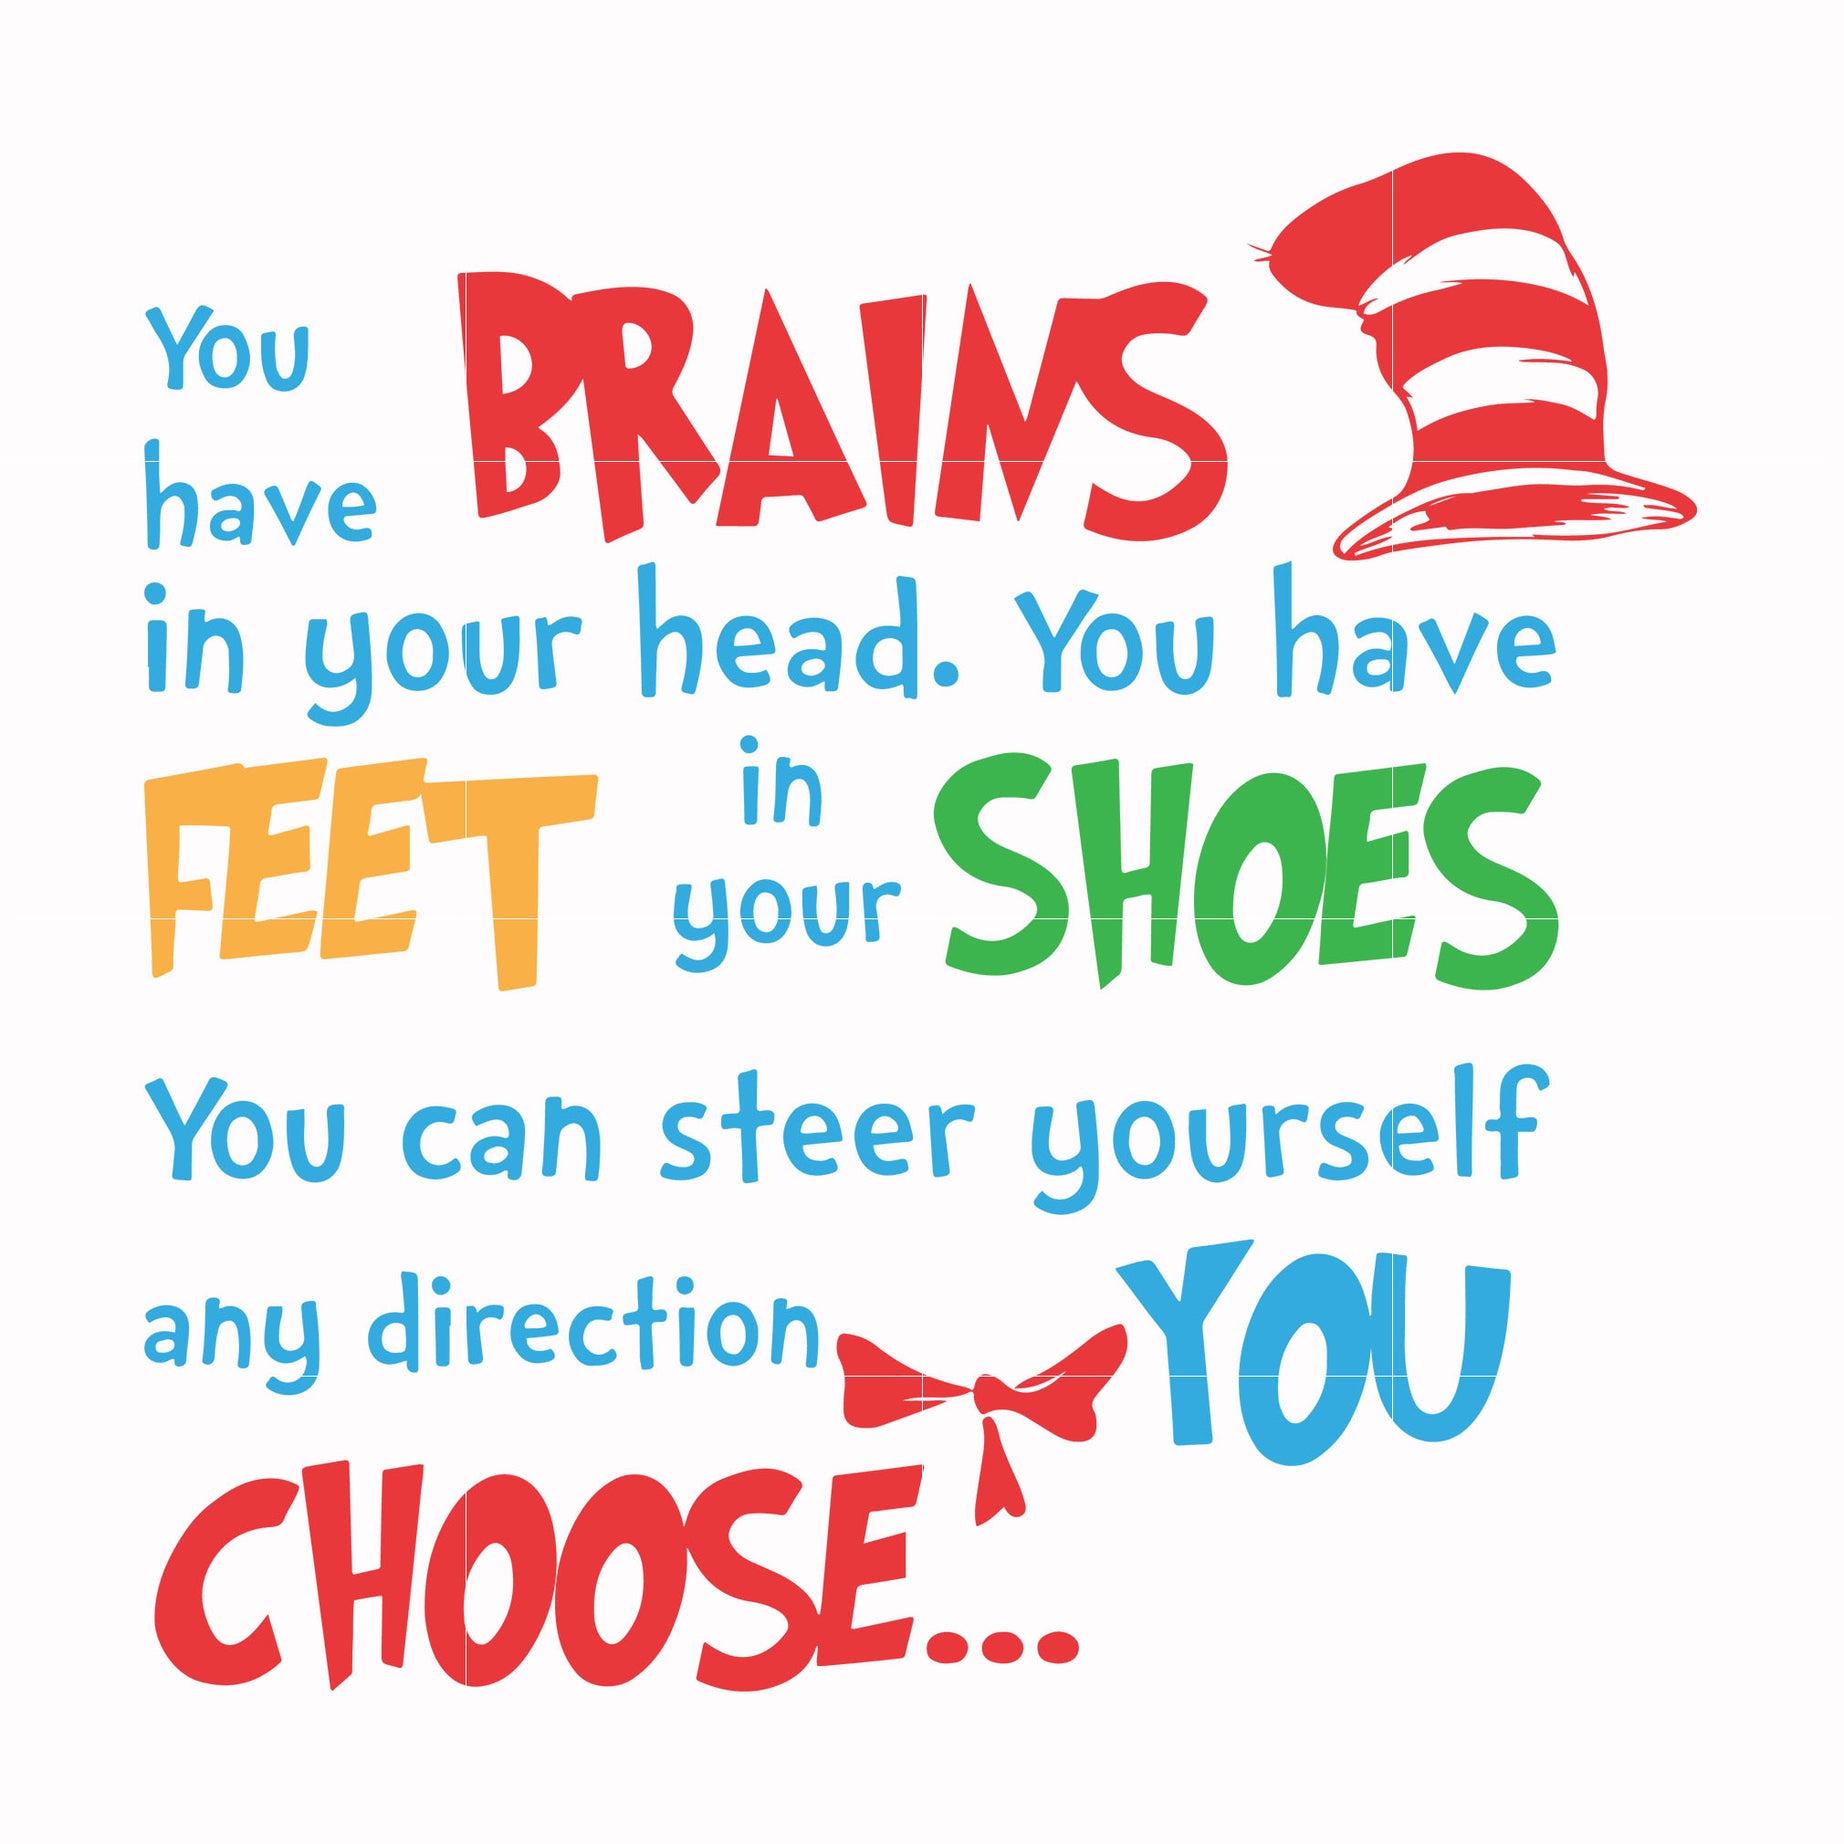 You have brains in your head you have feet in your shoes you can steer yourself any direction you choose svg, png, dxf, eps file DR000144